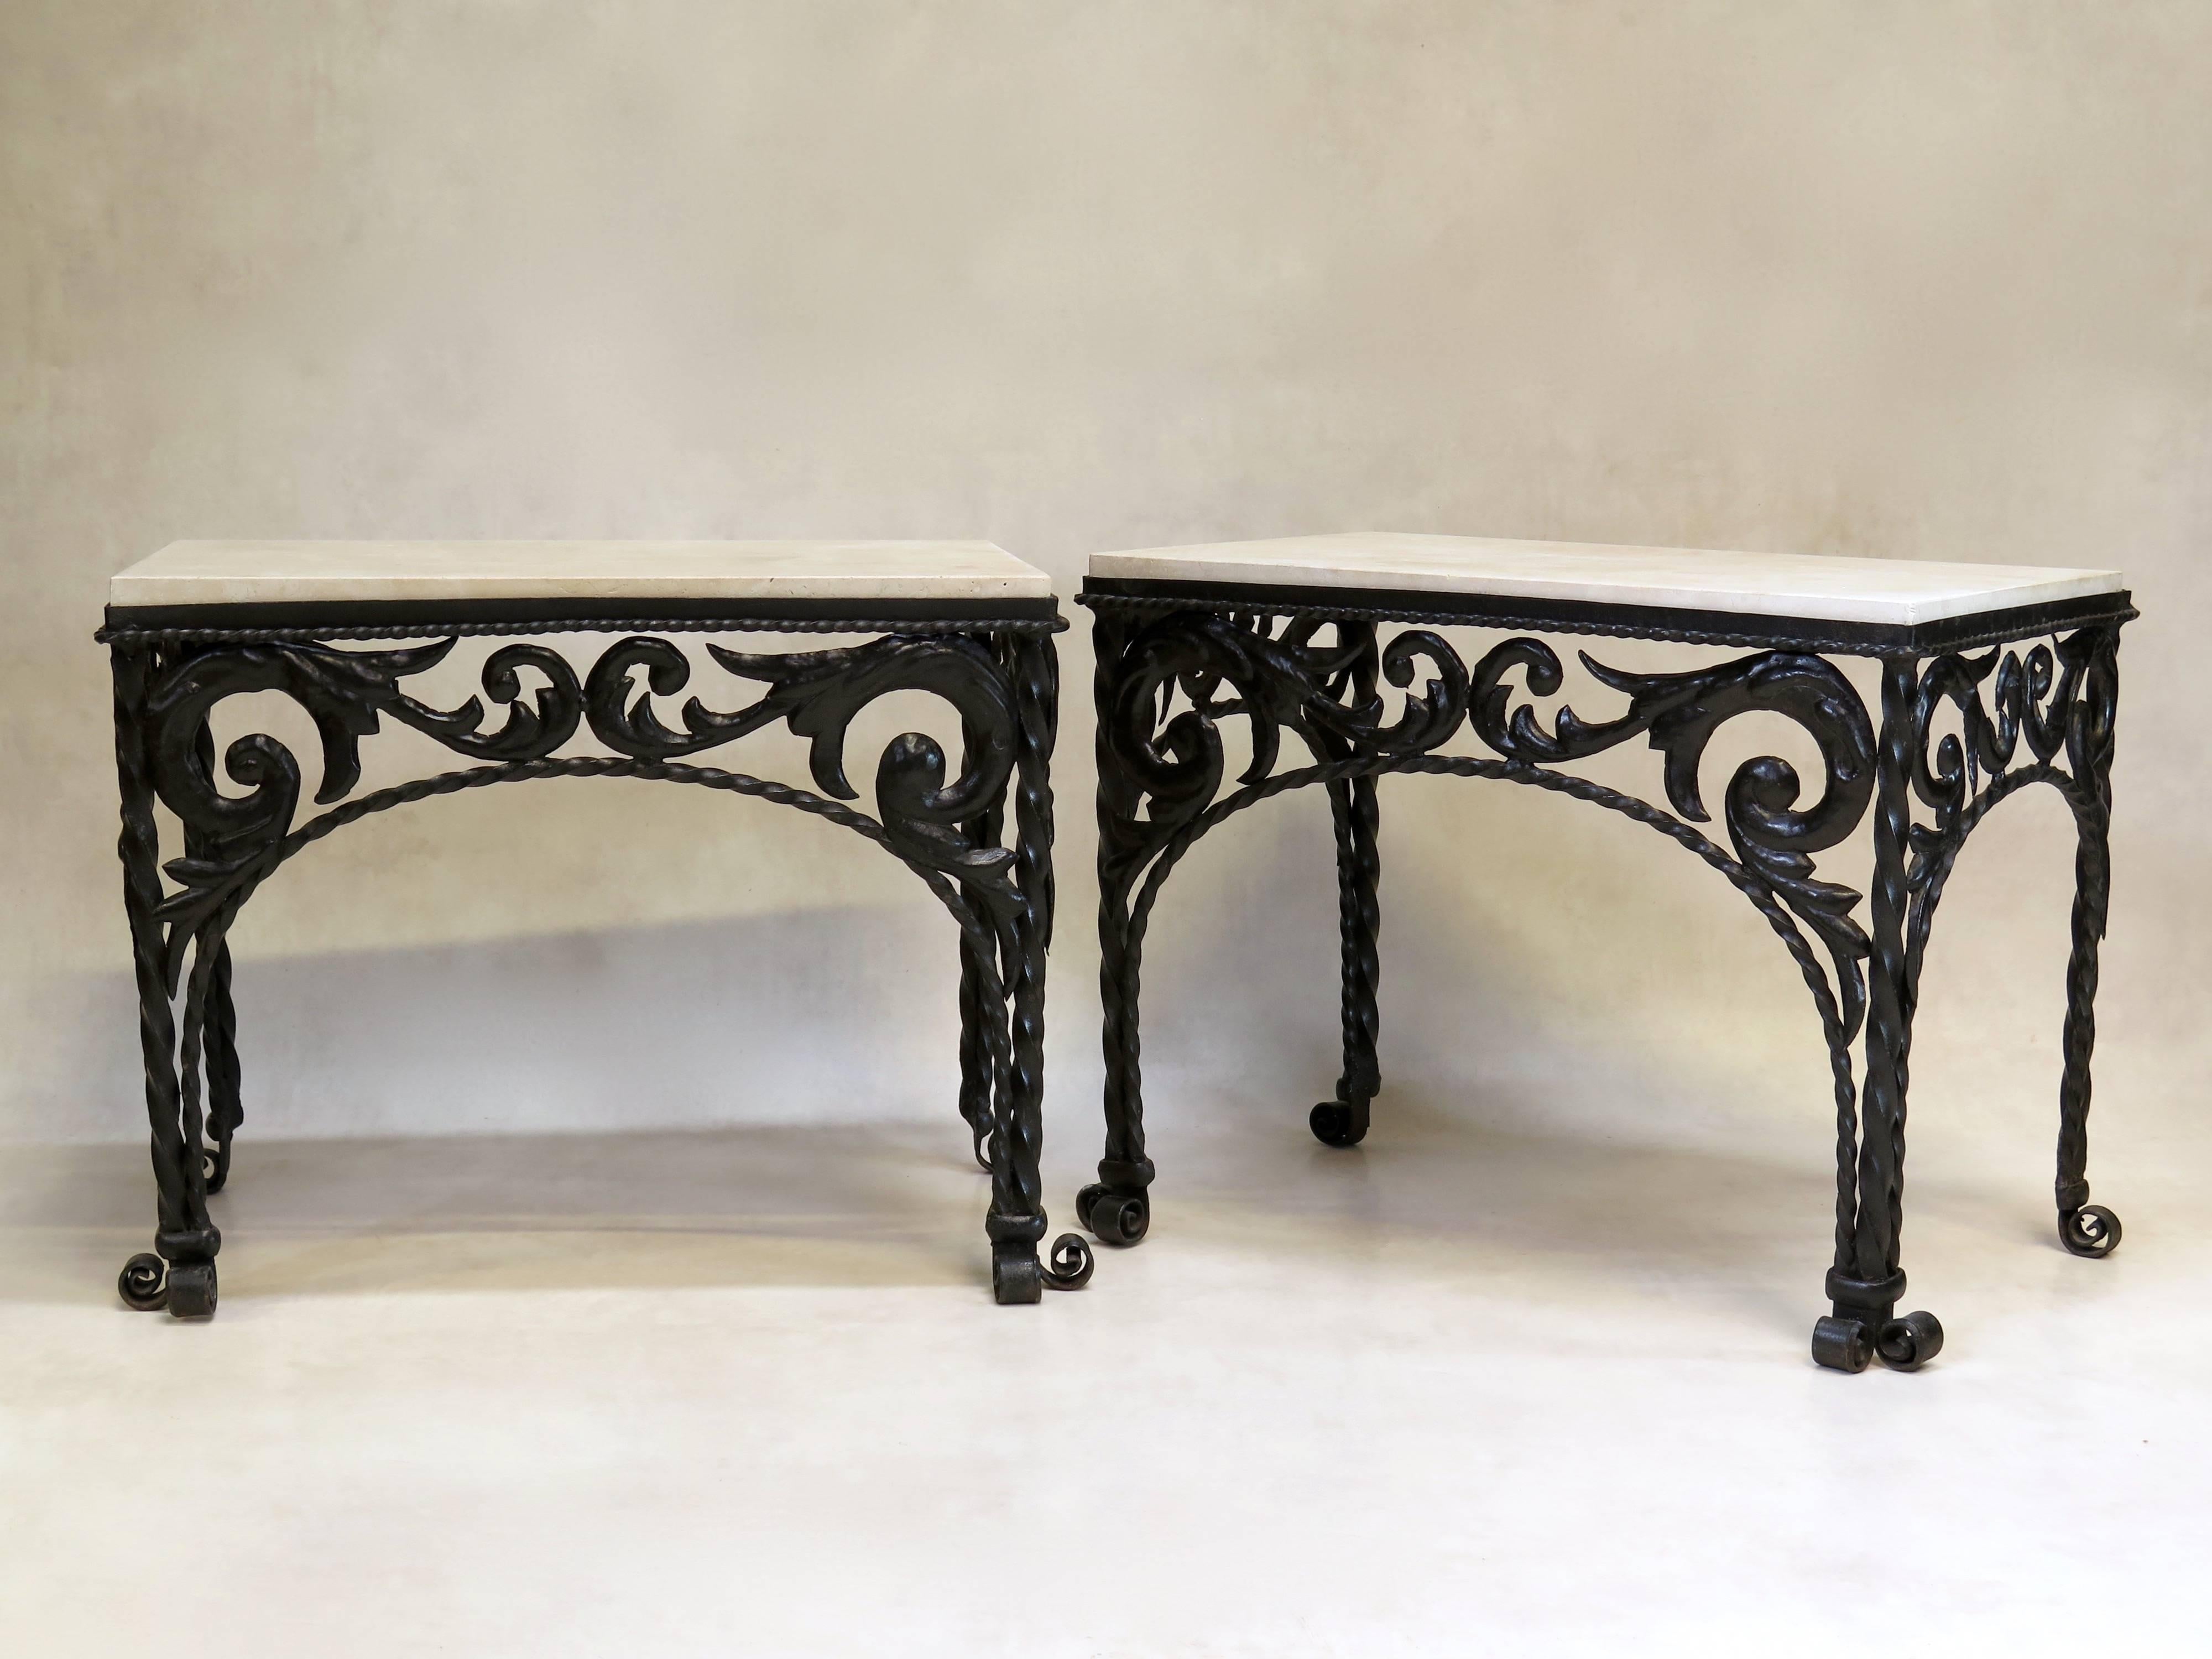 Lovely and heavy pair of unusual, solid iron tables with a foliate decor and twisted iron legs ending in scrolled feet. The apron runs around three sides.

Travertine tops.